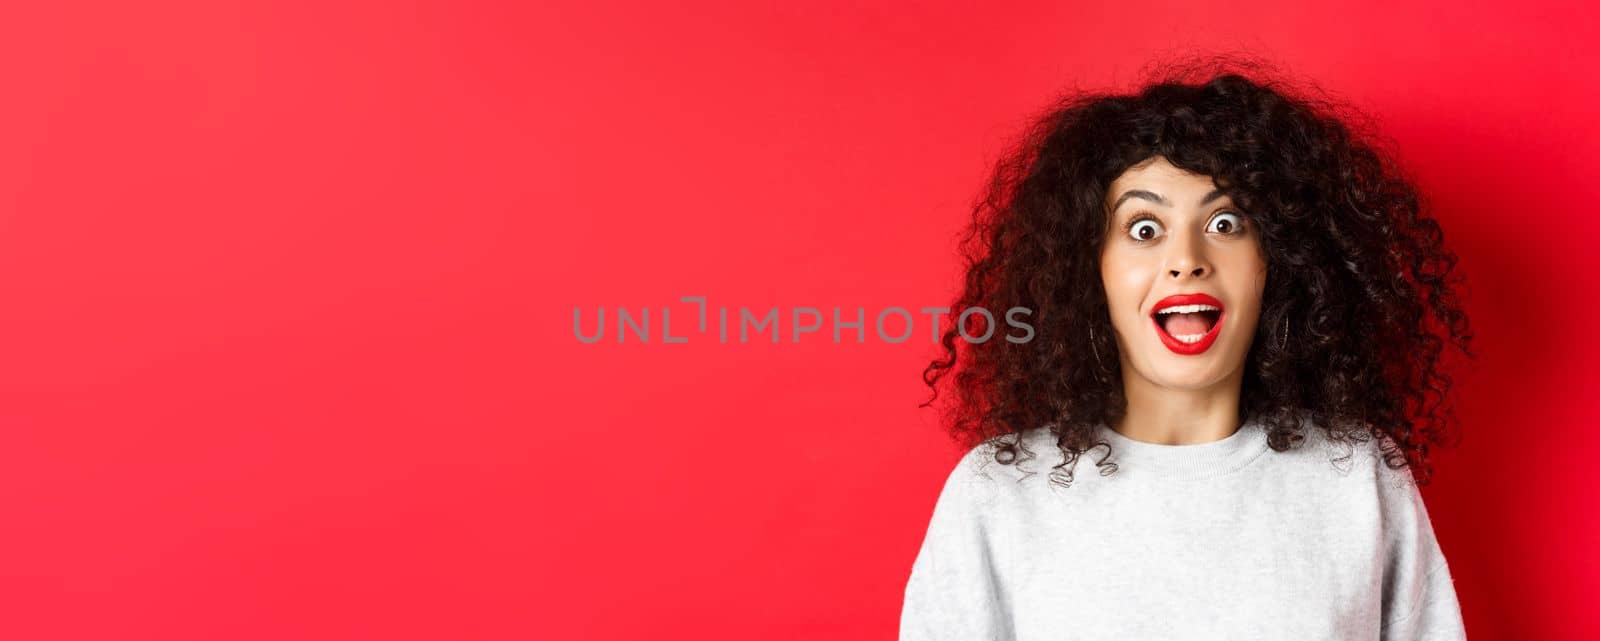 Close-up portrait of excited woman with curly hair, scream surprised and amazed, checking out special deal, standing on red background.